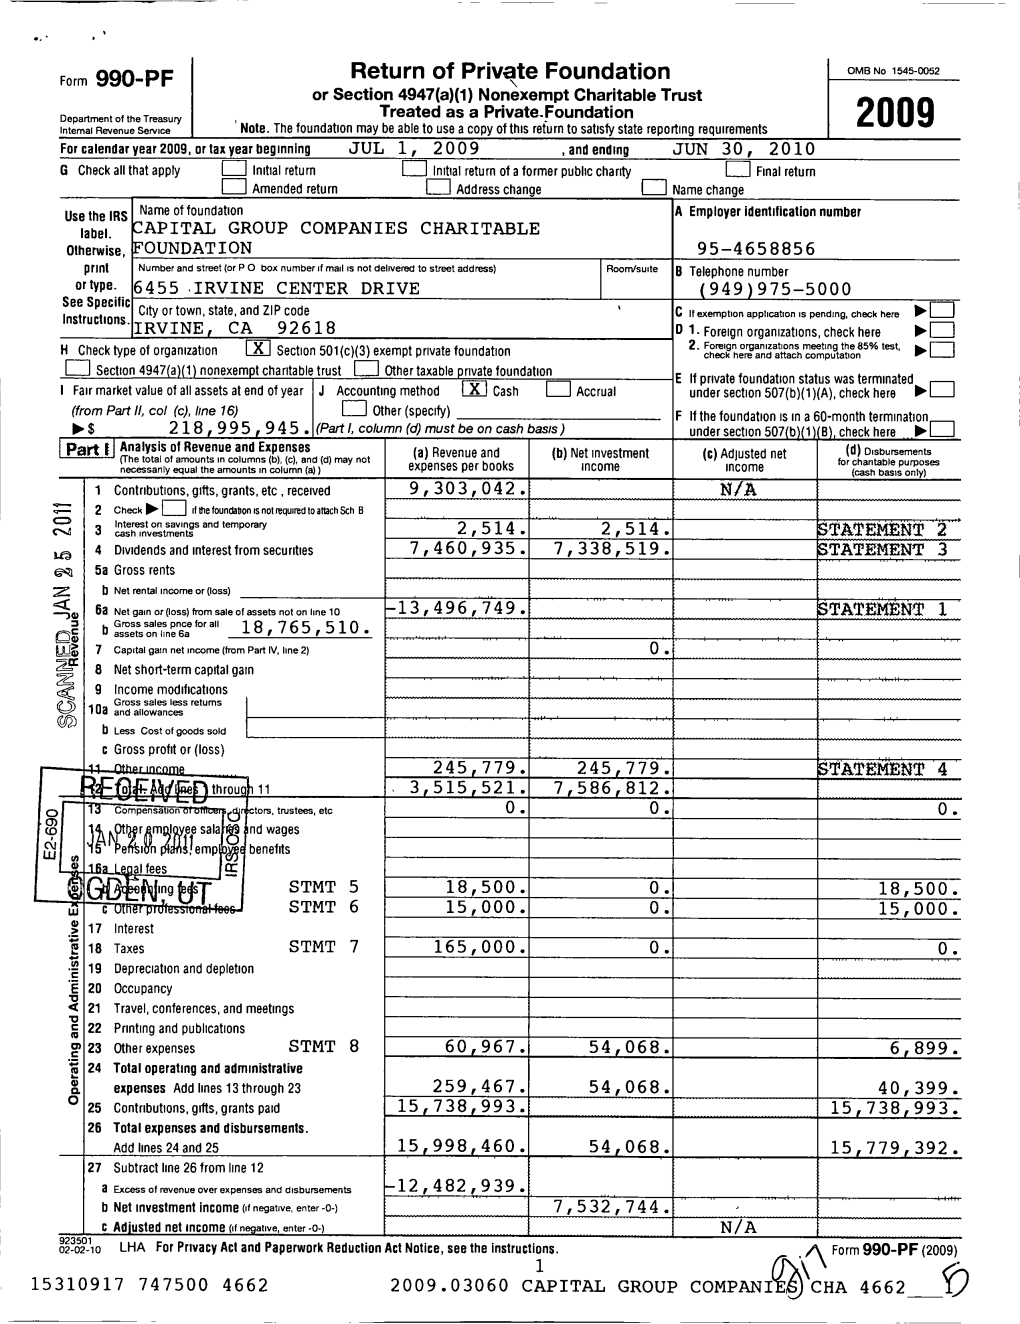 Form 990-PF Return of Private Foundation Or Section 4947(A)(1) Nonexempt Charitable Trust